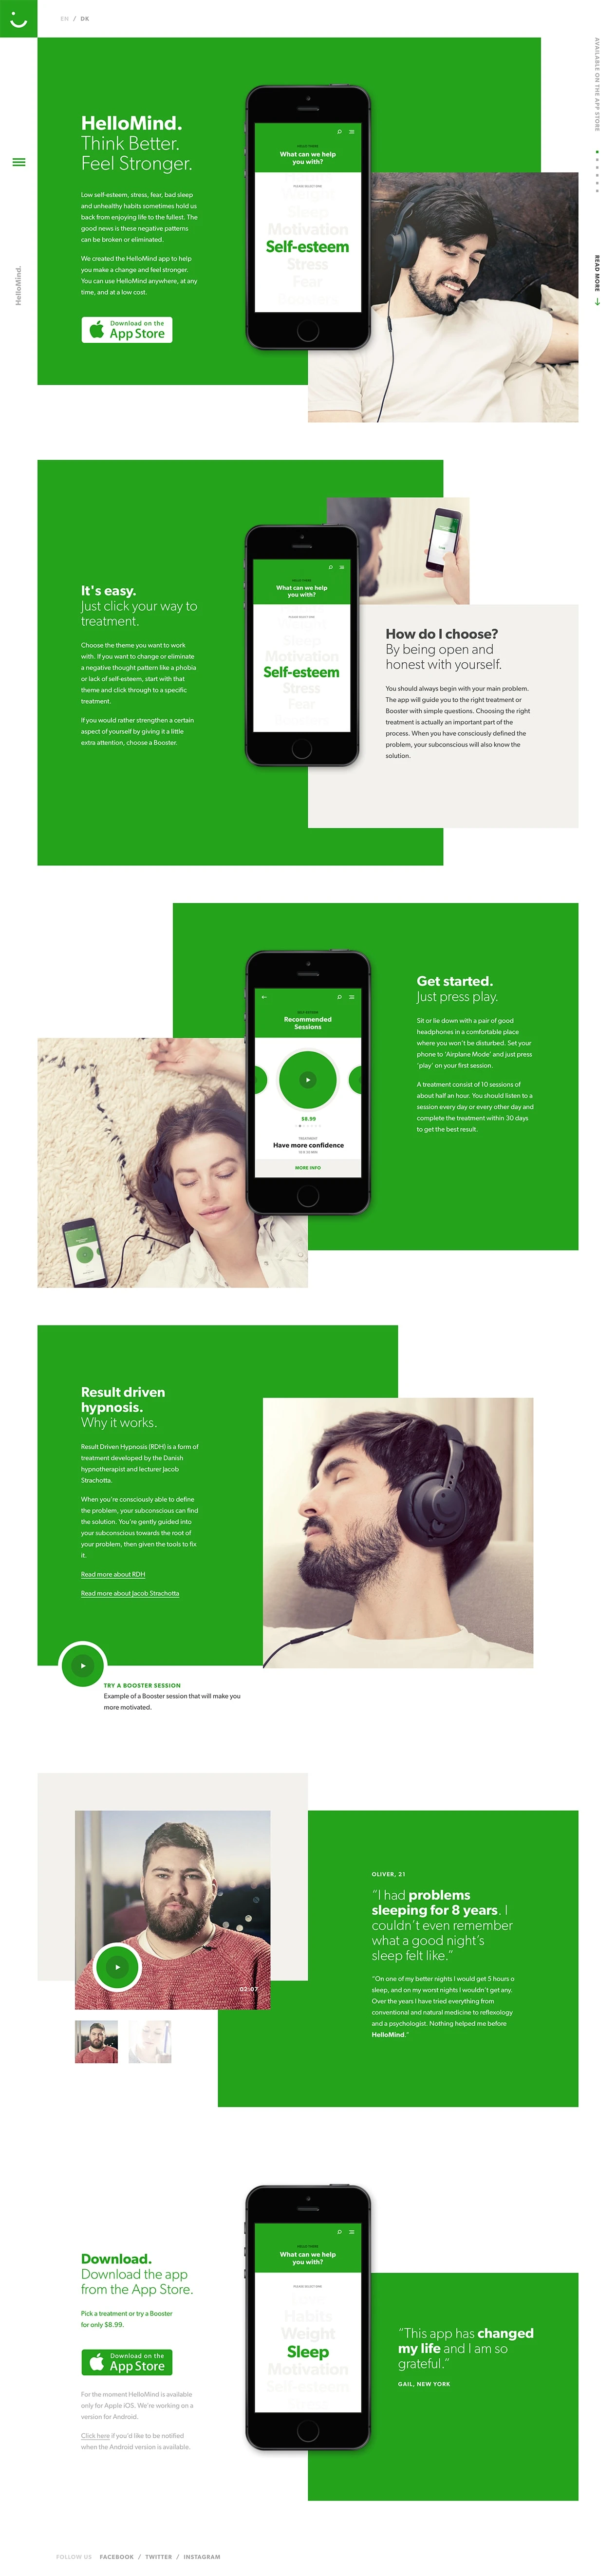 HelloMind Landing Page Example: Low self-esteem, stress, fear, bad sleep and unhealthy habits sometimes hold us back from enjoying life to the fullest.